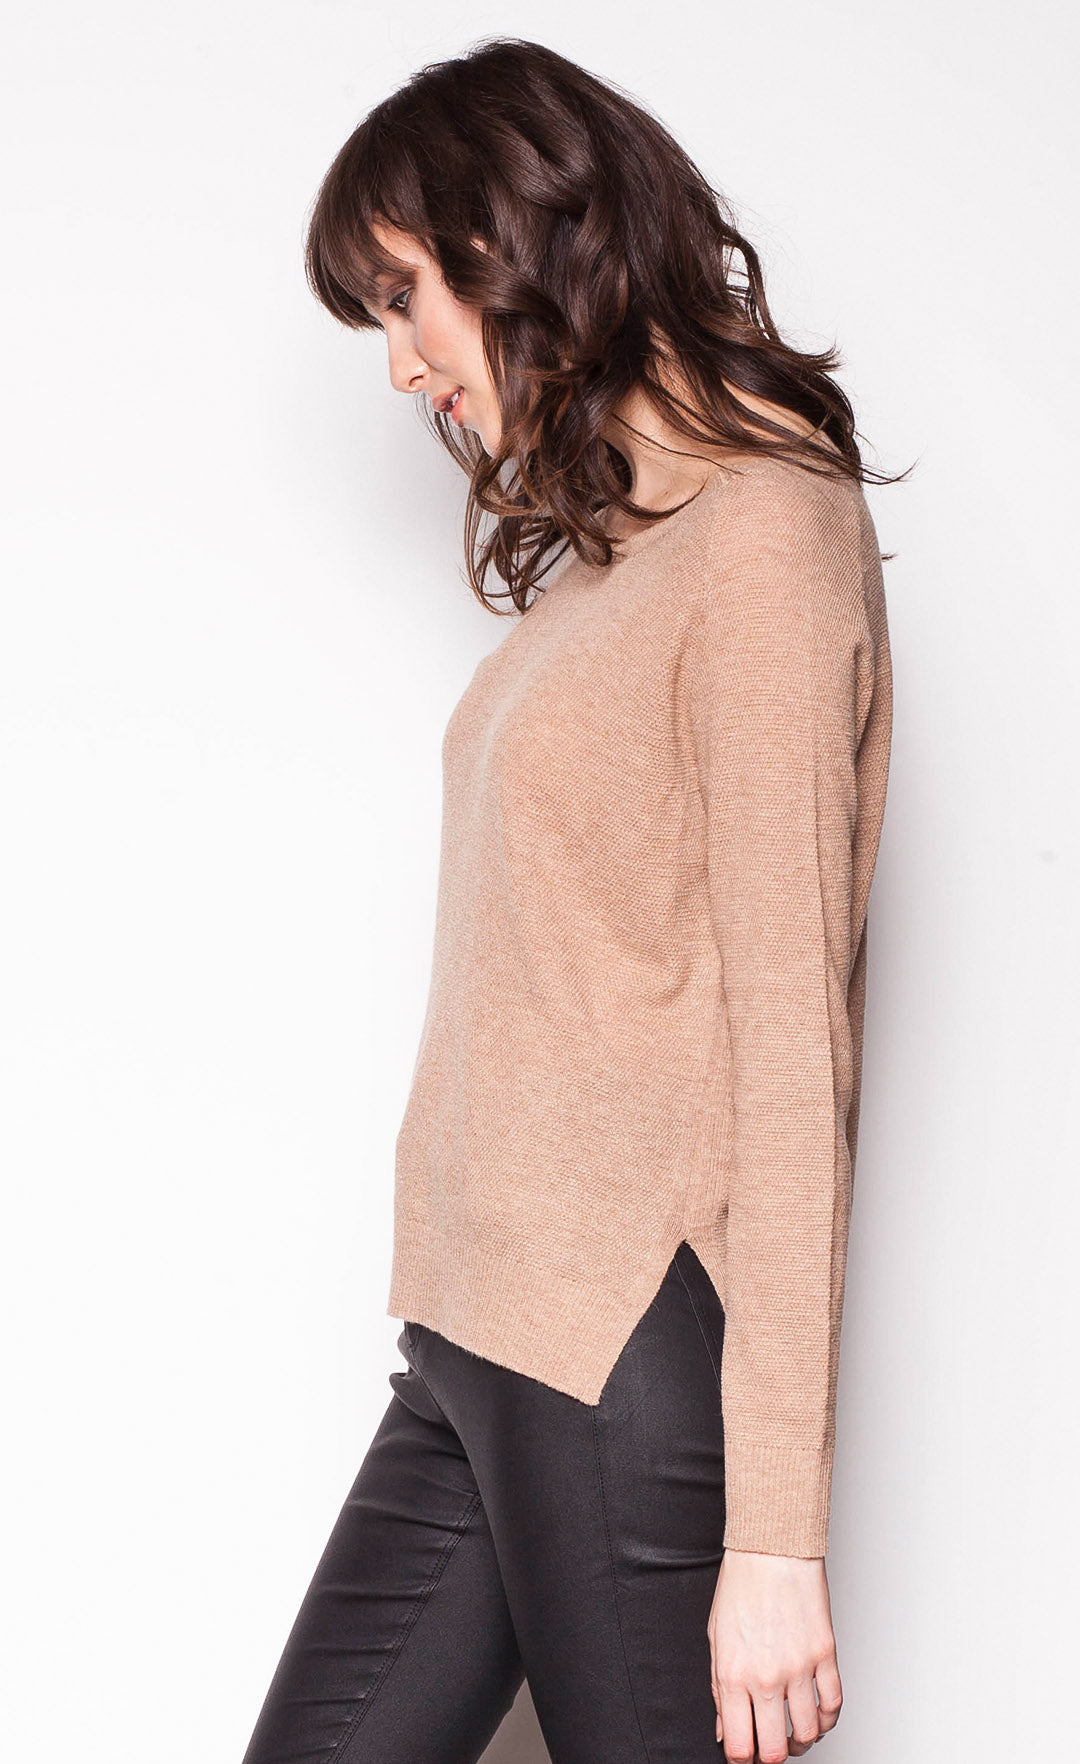 Basique Love Sweater - Pink Martini Collection